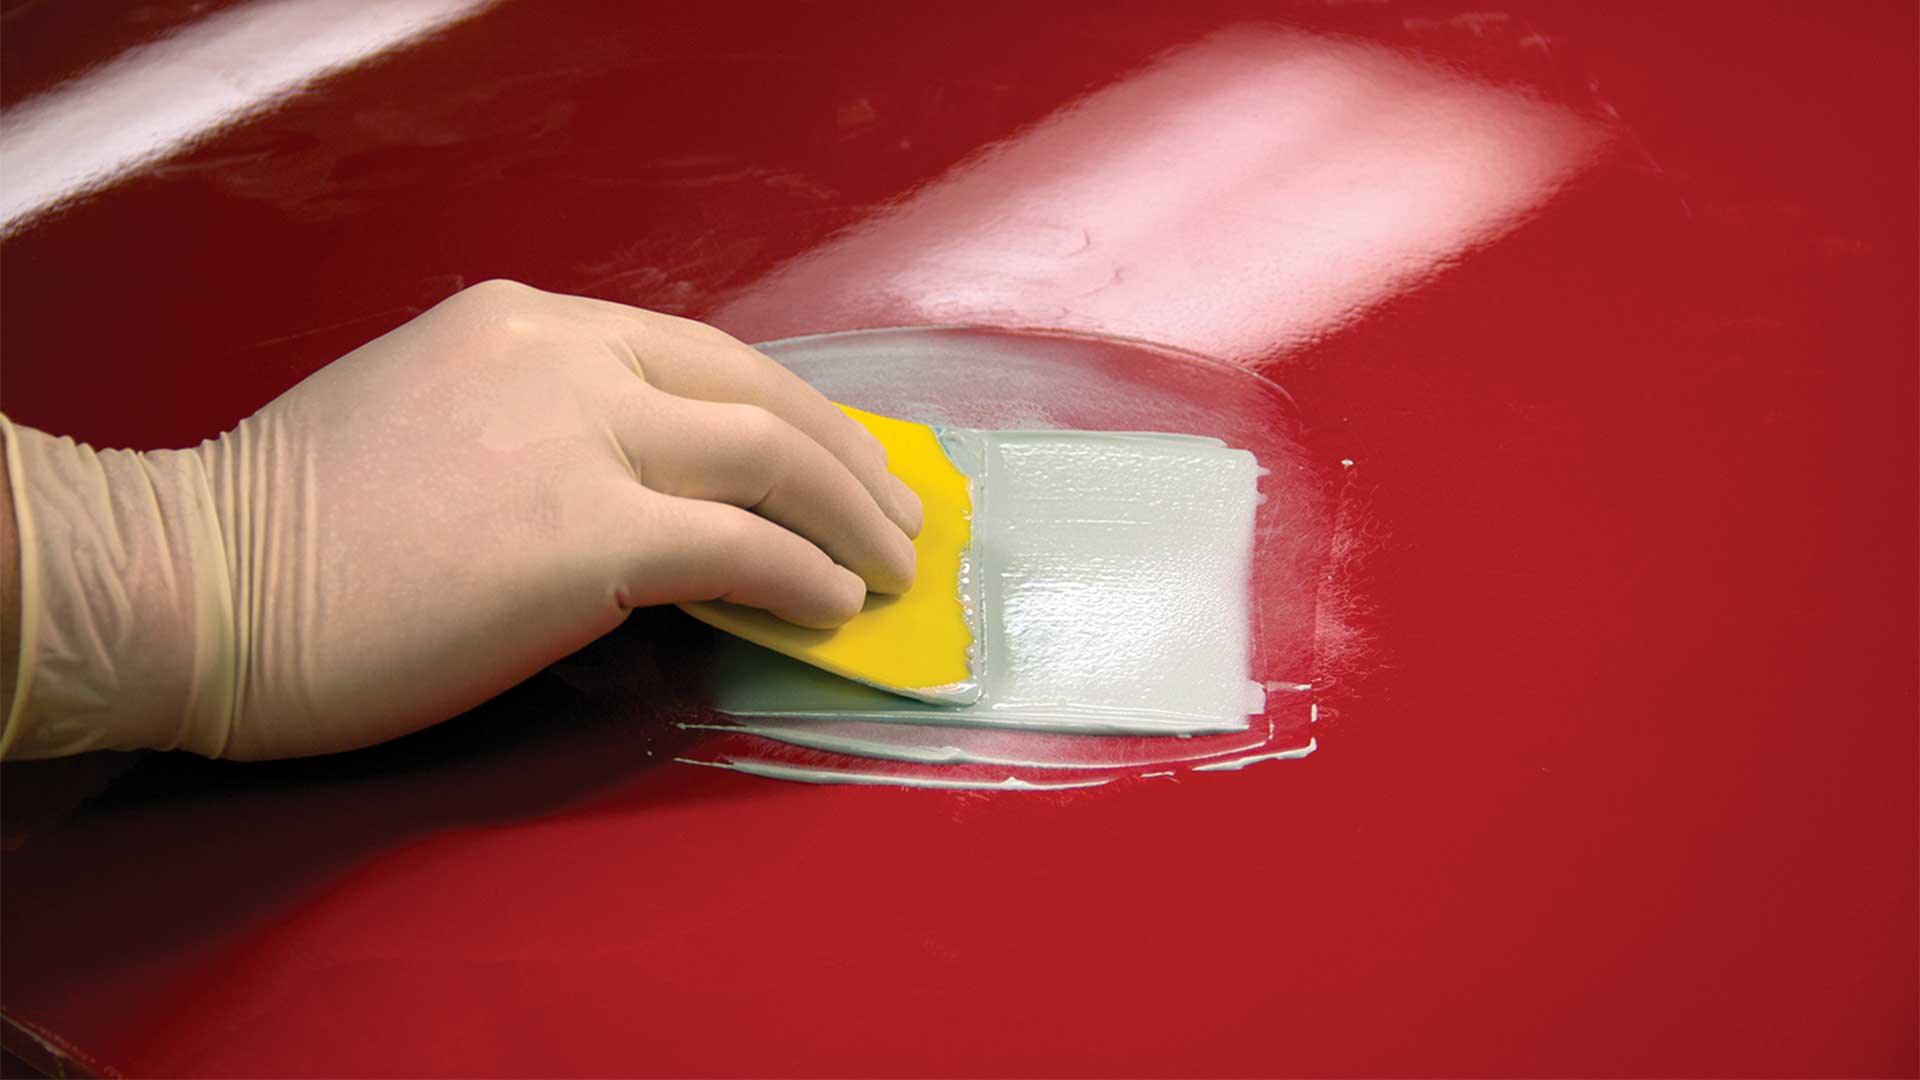 Evercoat Rage Ultra on red surface